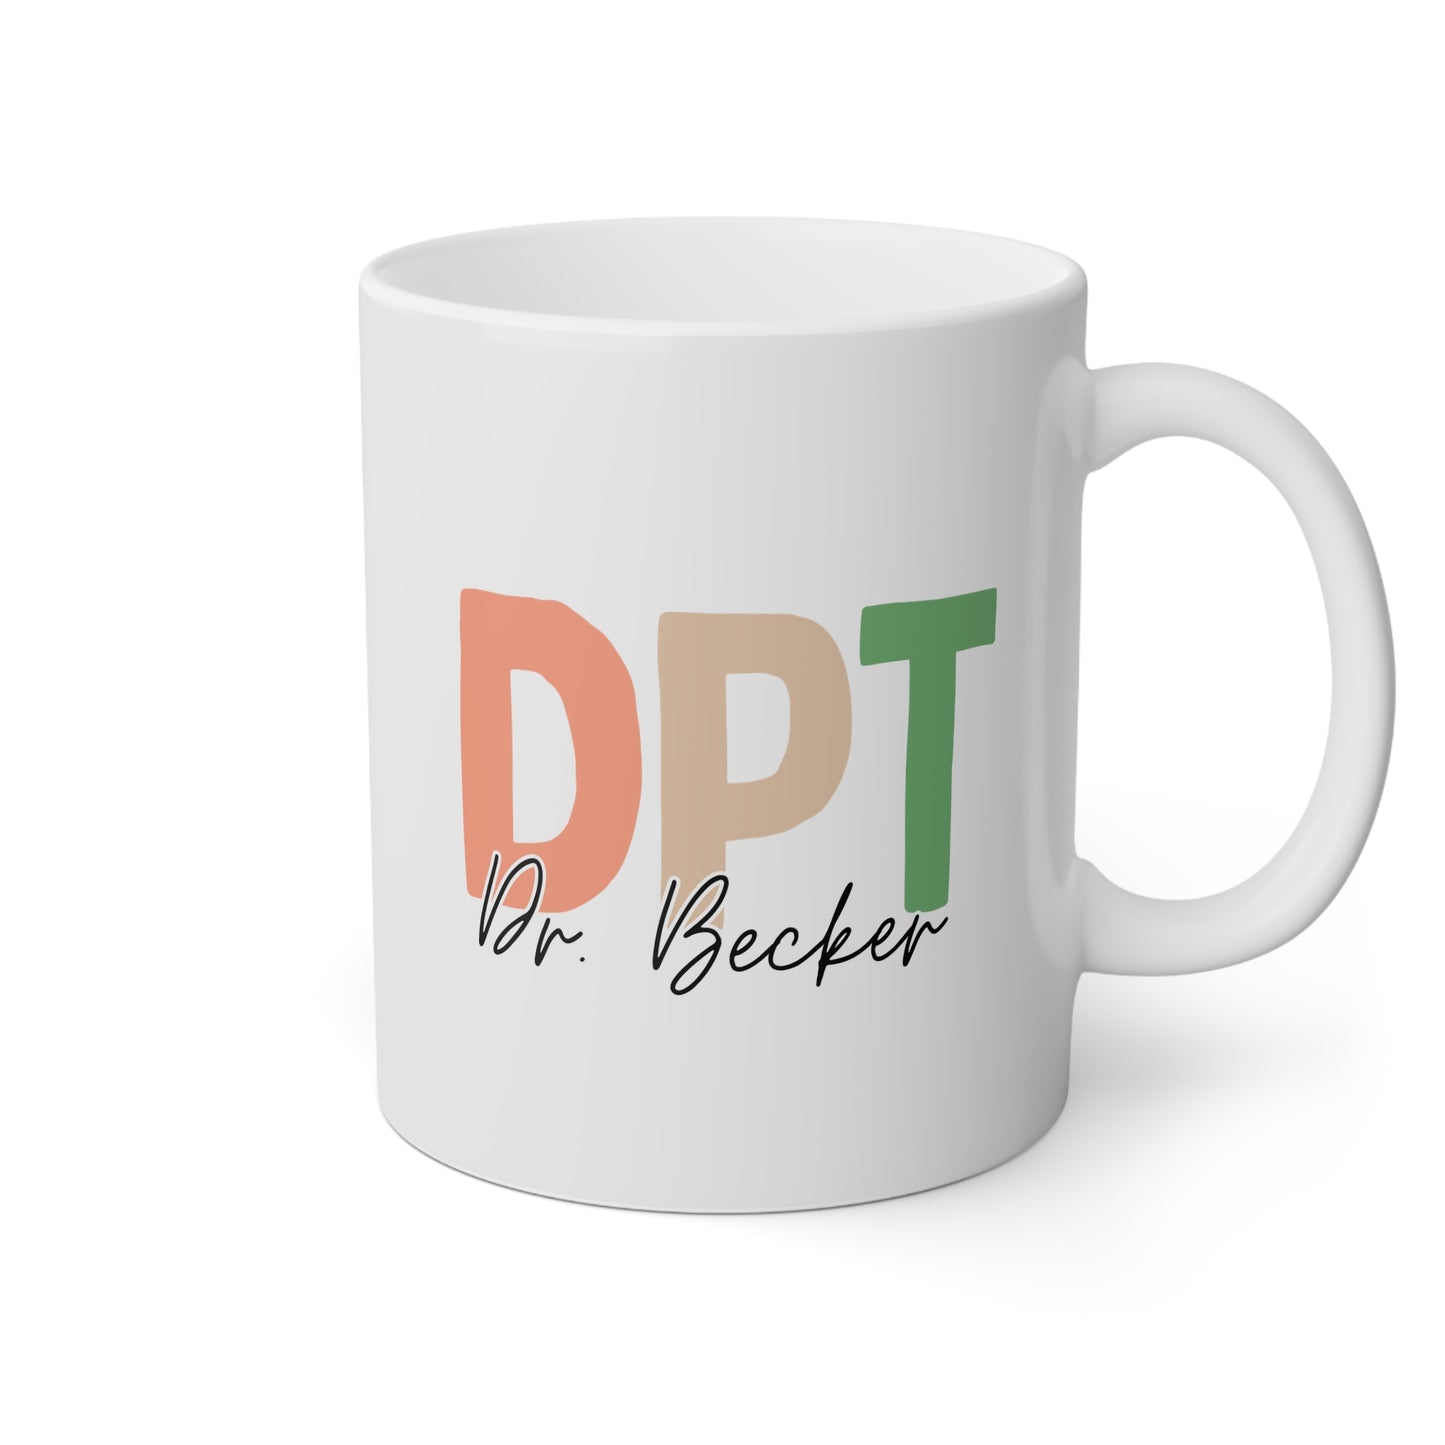 DPT Name 11oz white funny large coffee mug gift for doctor of physical therapy custom graduation Dr medicine waveywares wavey wares wavywares wavy wares